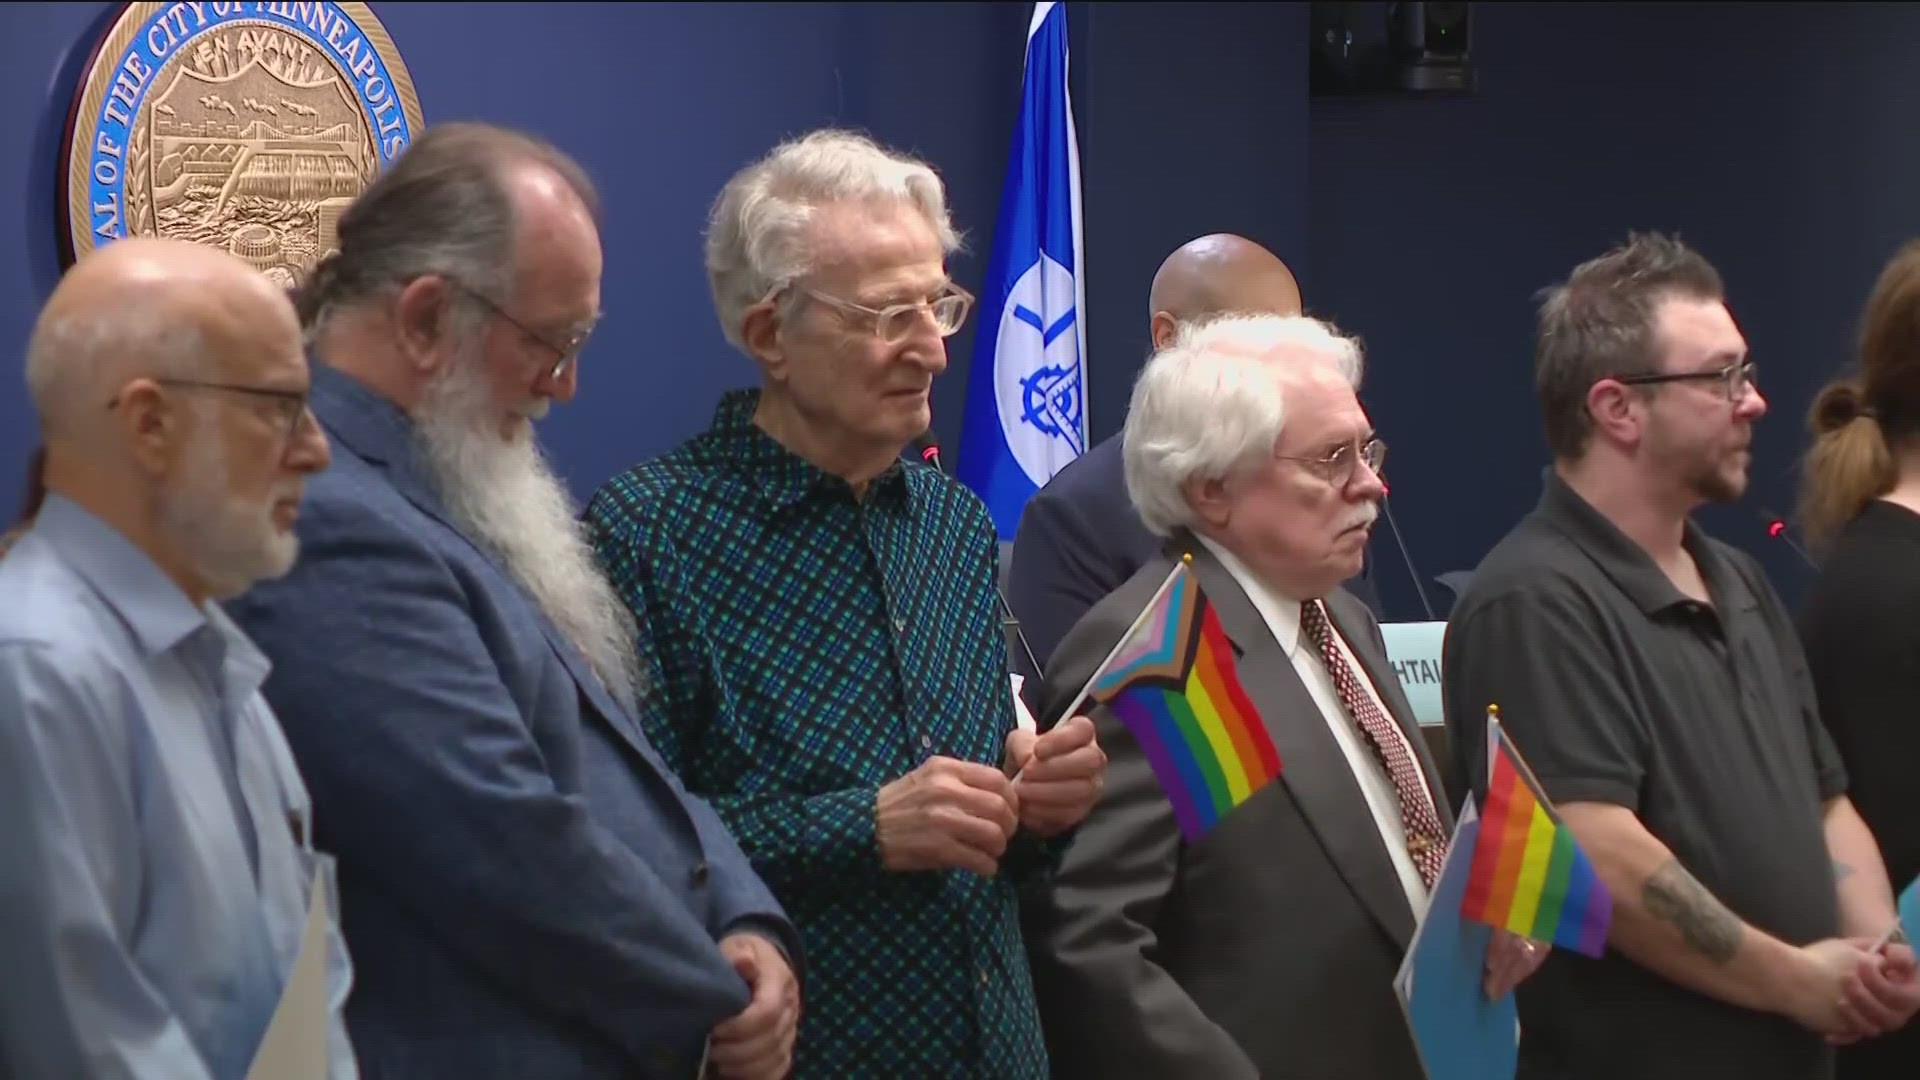 The Minneapolis City Council gathered with LGBTQ+ advocates Thursday to celebrate the 50th anniversary of the 1974 Gay Civil Rights Ordinance.